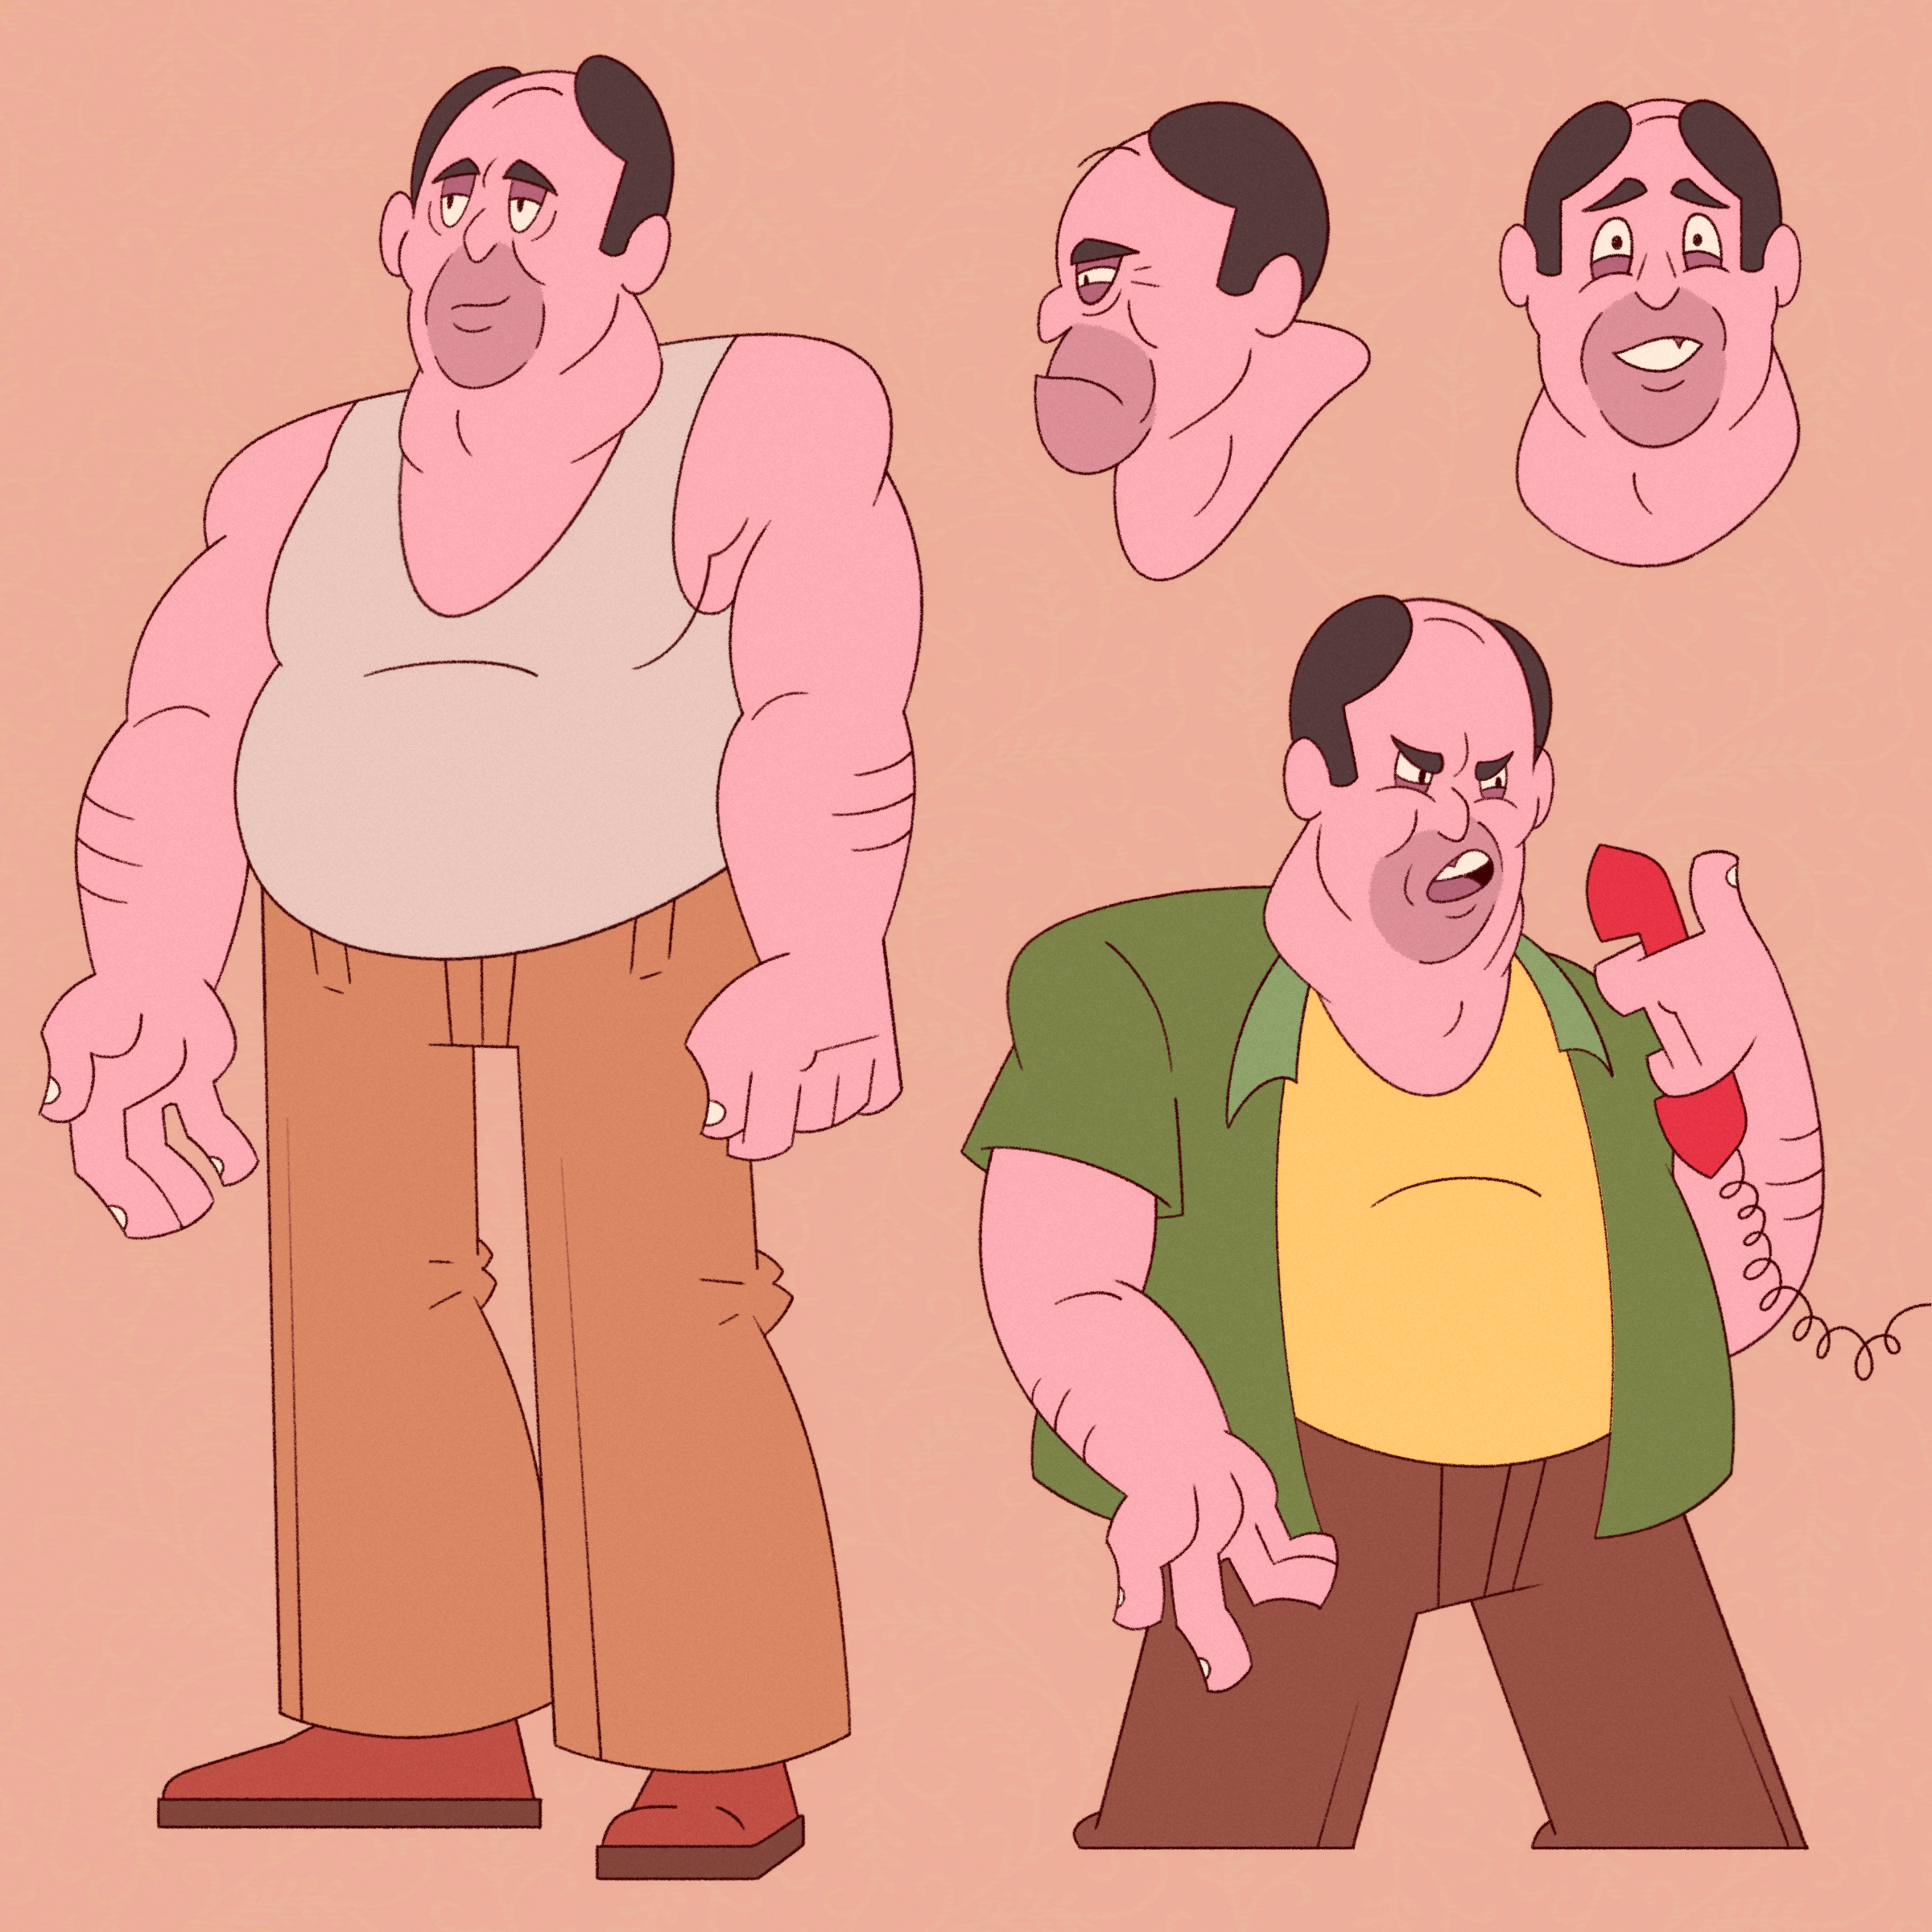 Tony Soprano Character Design and Expressions